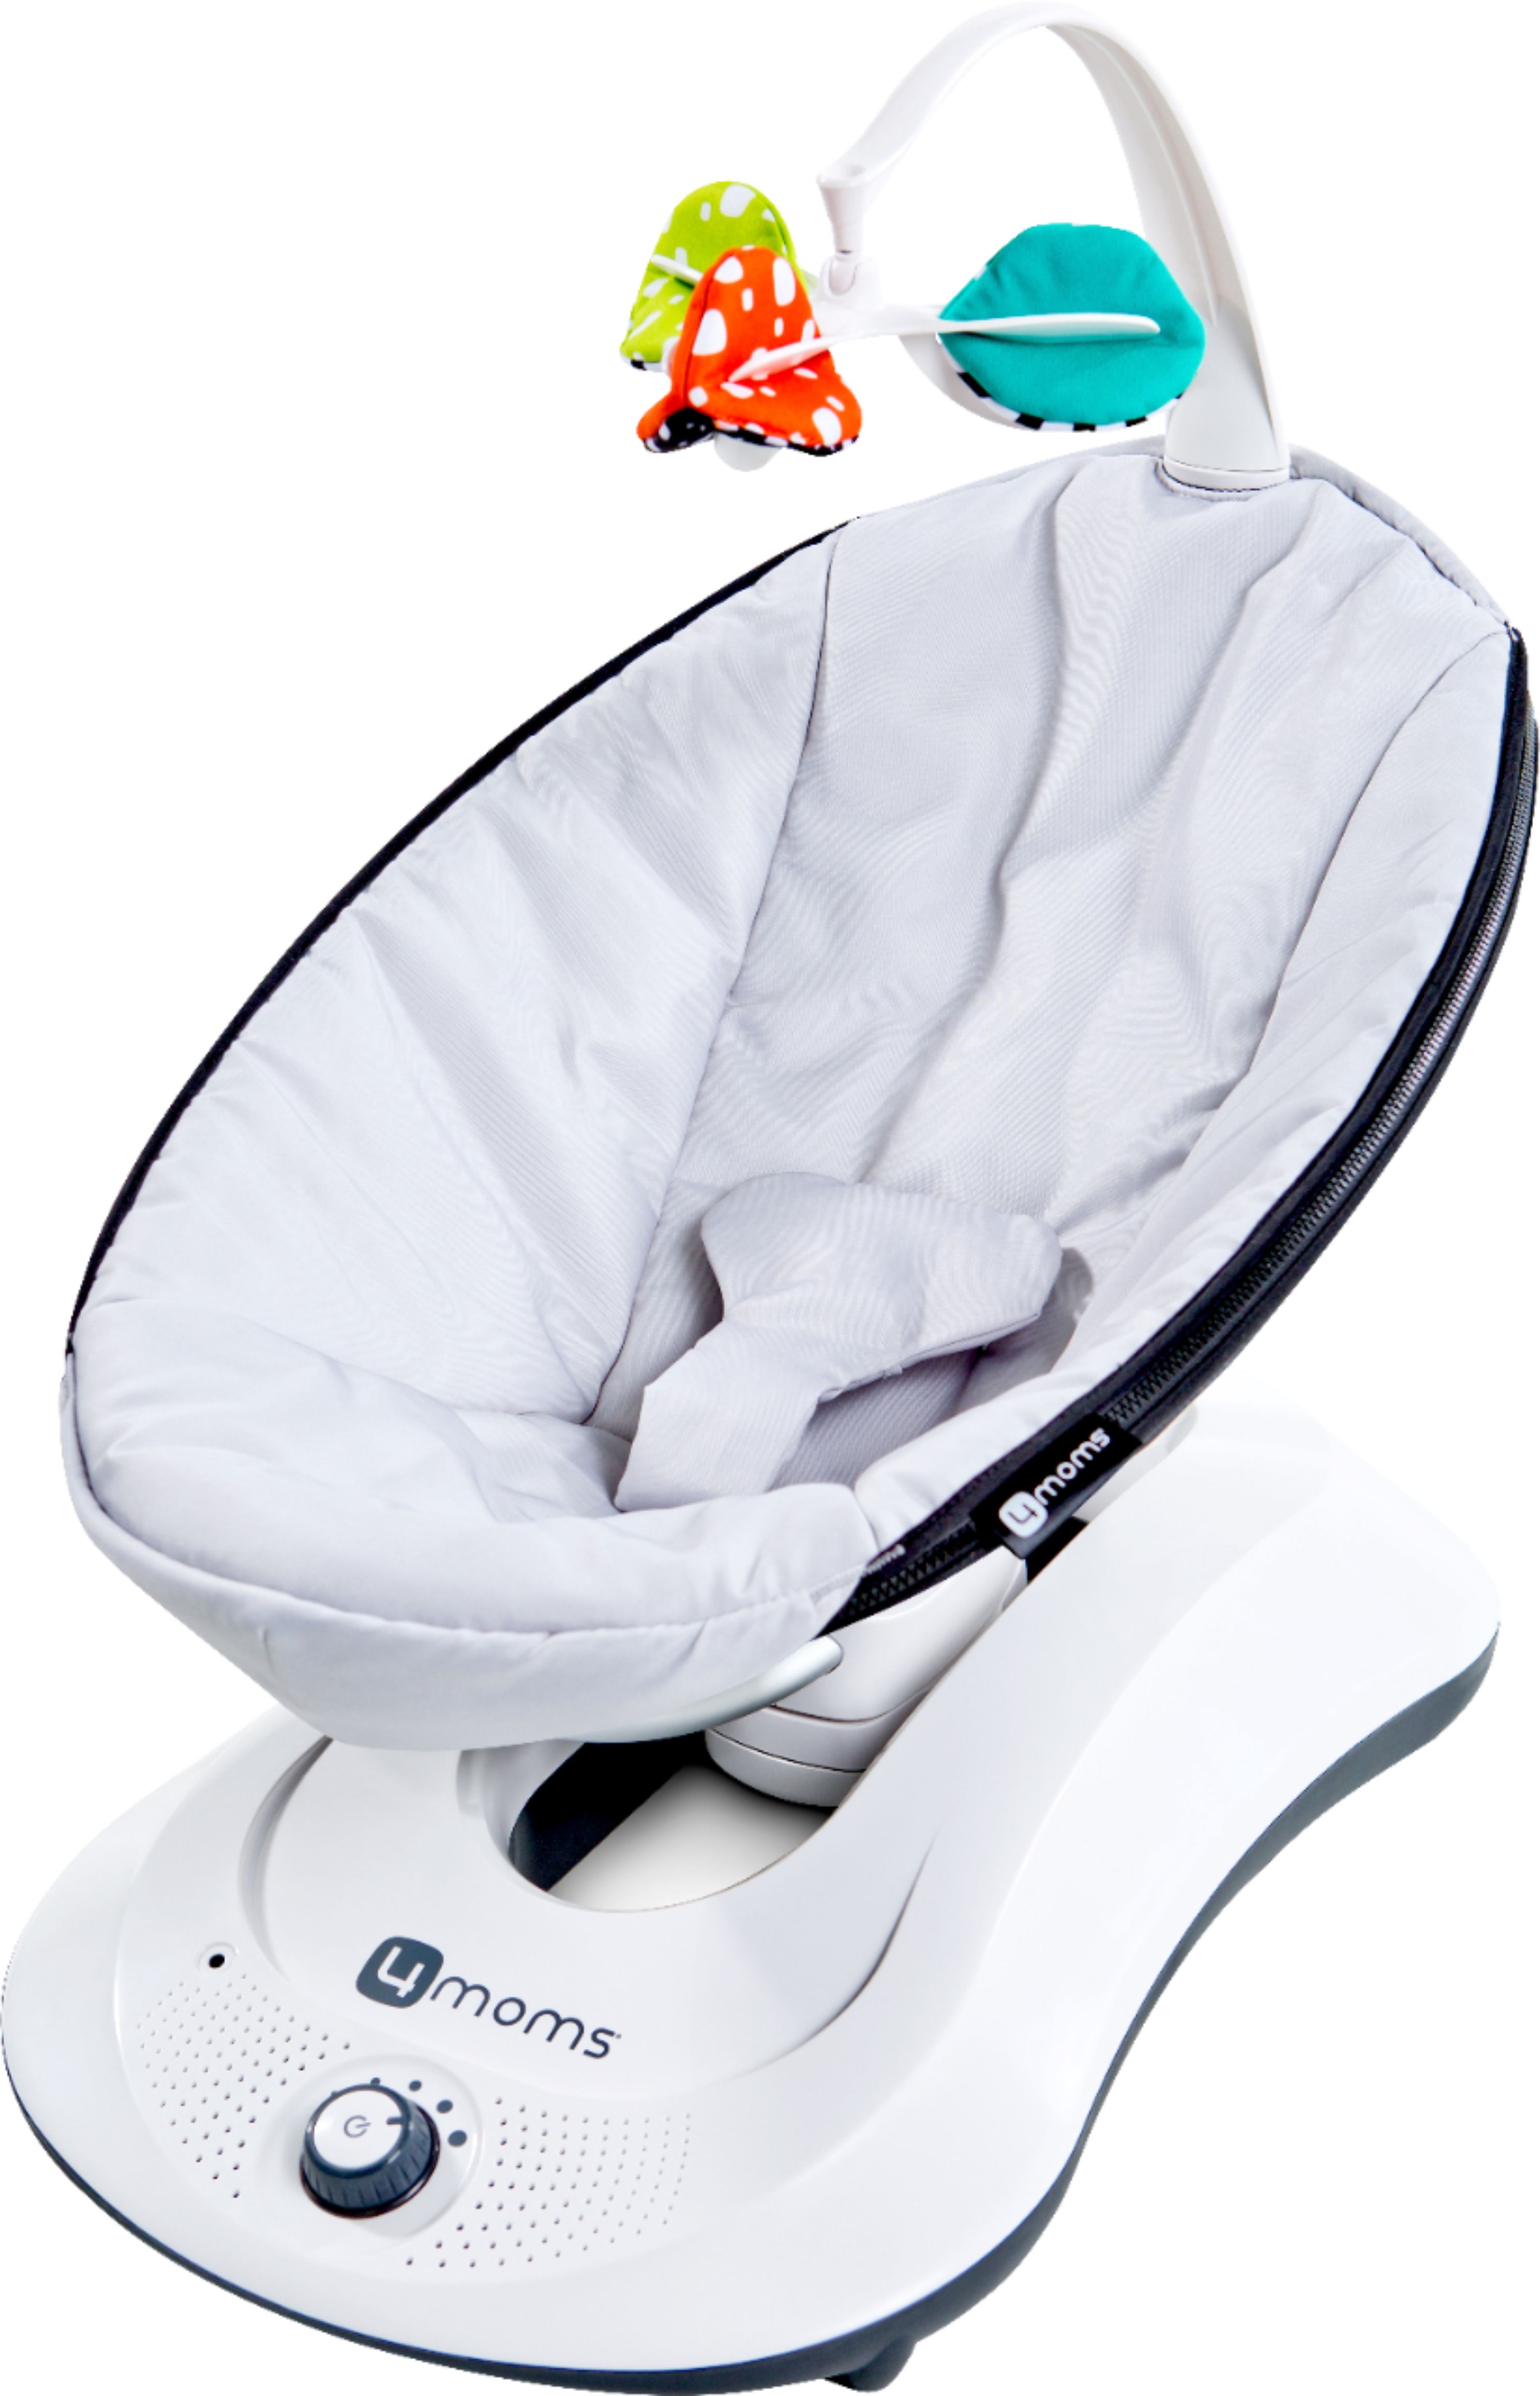 Angle View: 4moms mamaRoo 4 Baby Swing, Bluetooth Baby Rocker with 5 Unique Motions, Smooth, Nylon Fabric, Classic Black, Unisex